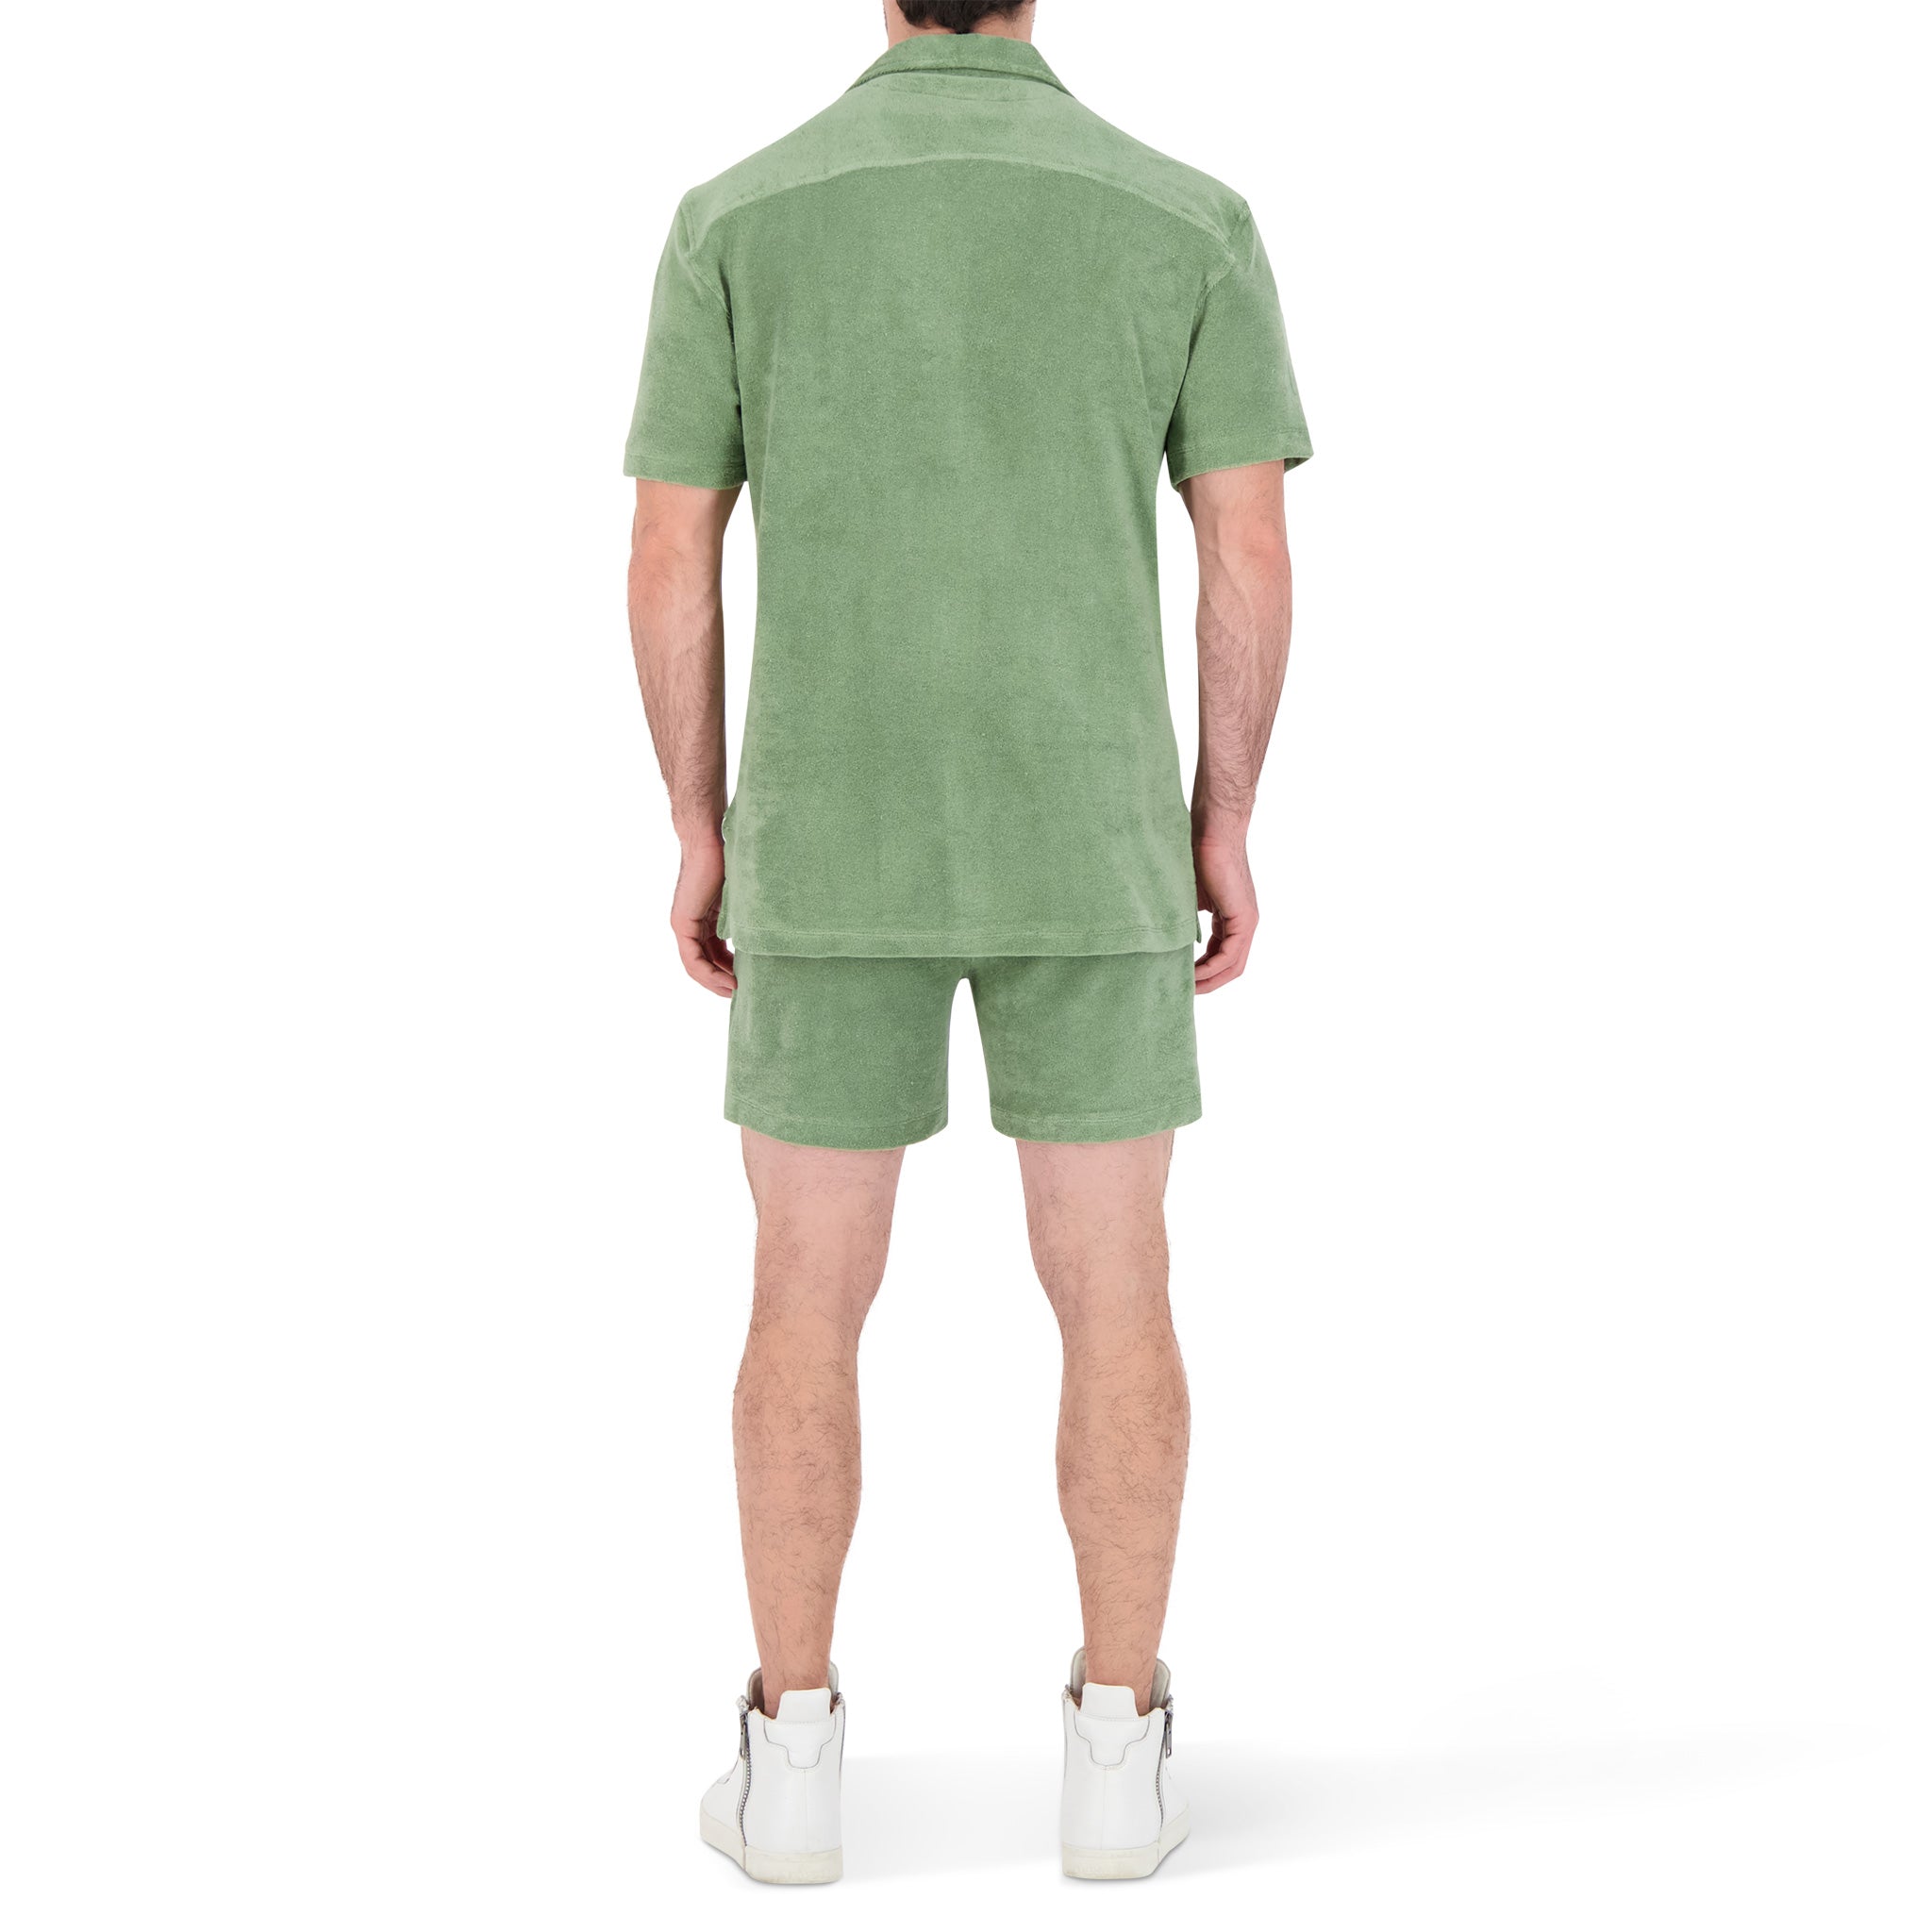 Terry Cloth Camp Shirt in Olive Green